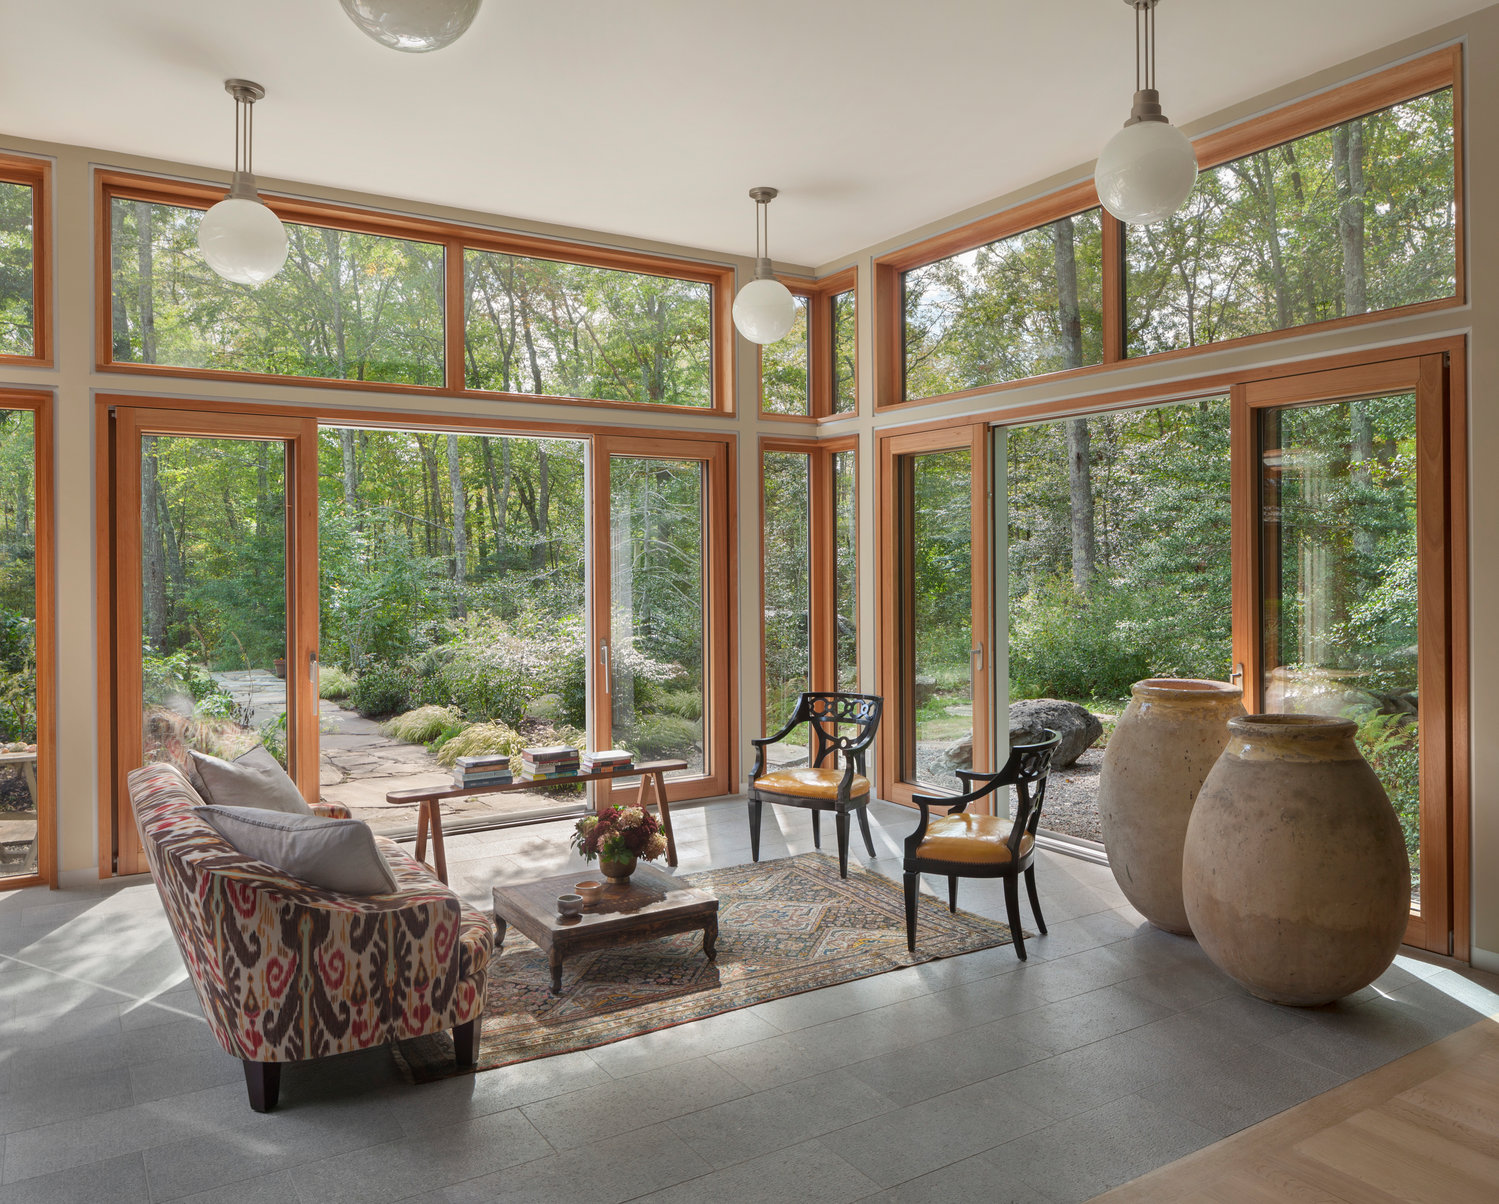 The garden room, or sunroom, showcases the simple elegance of the space, with walls of windows opening the home to the beautiful natural surroundings. This transitional space connects the entry courtyard to the primary living area.